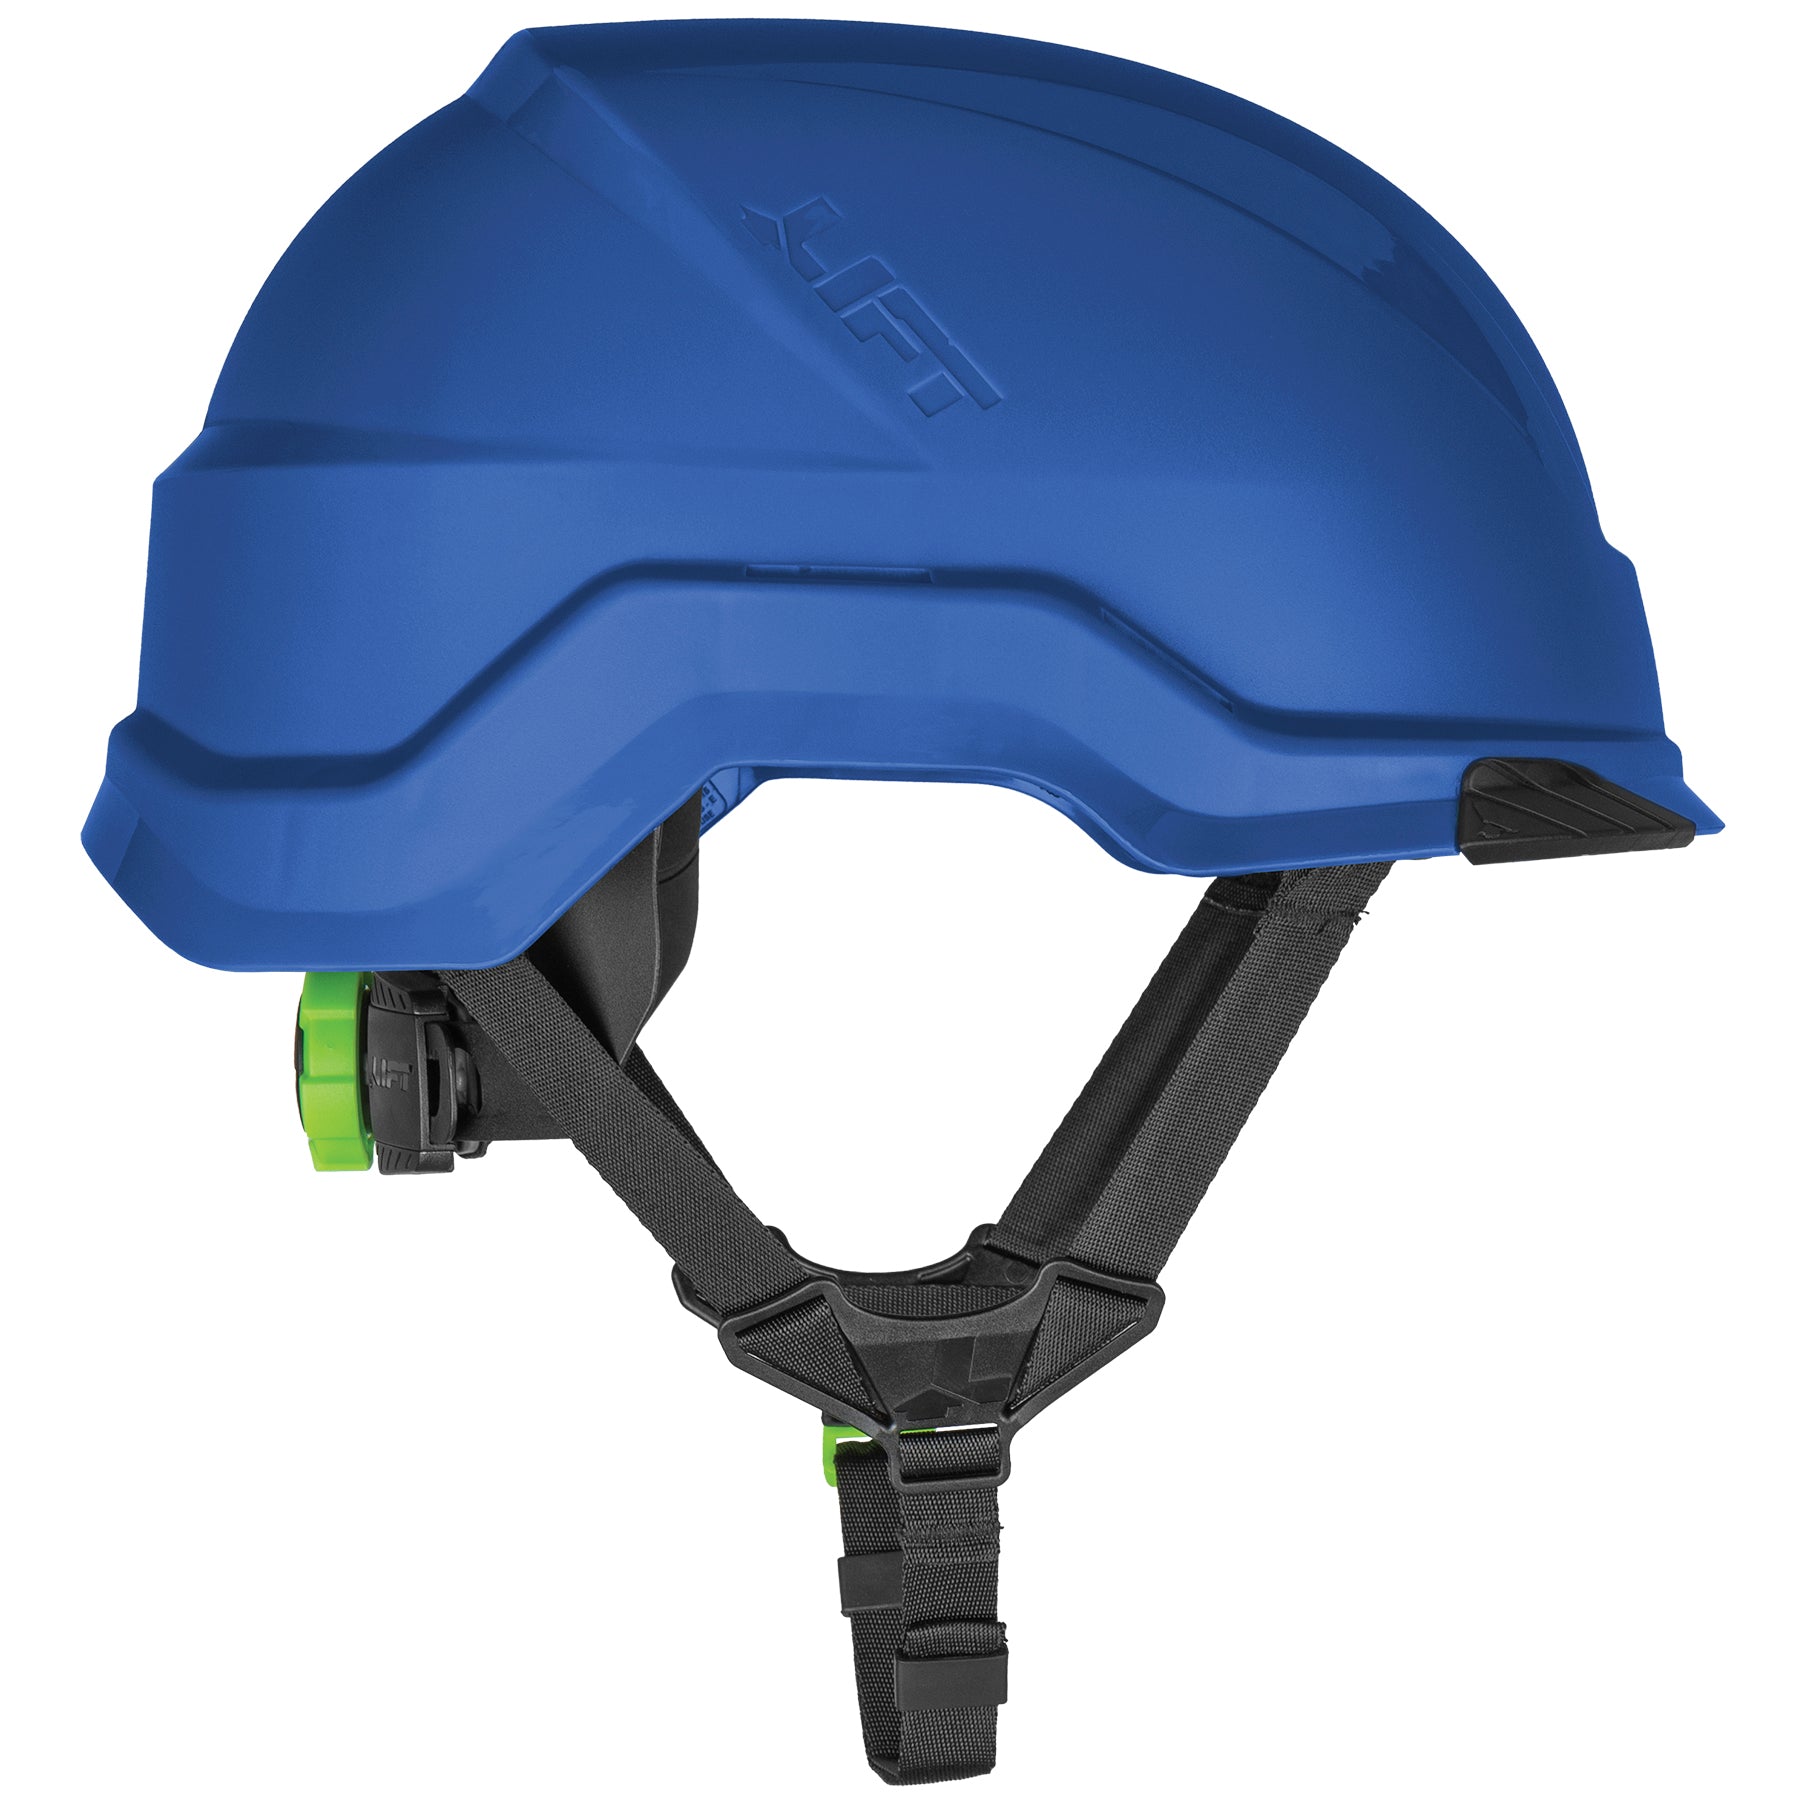 RADIX Safety Helmet - Non-Vented | LIFT Safety